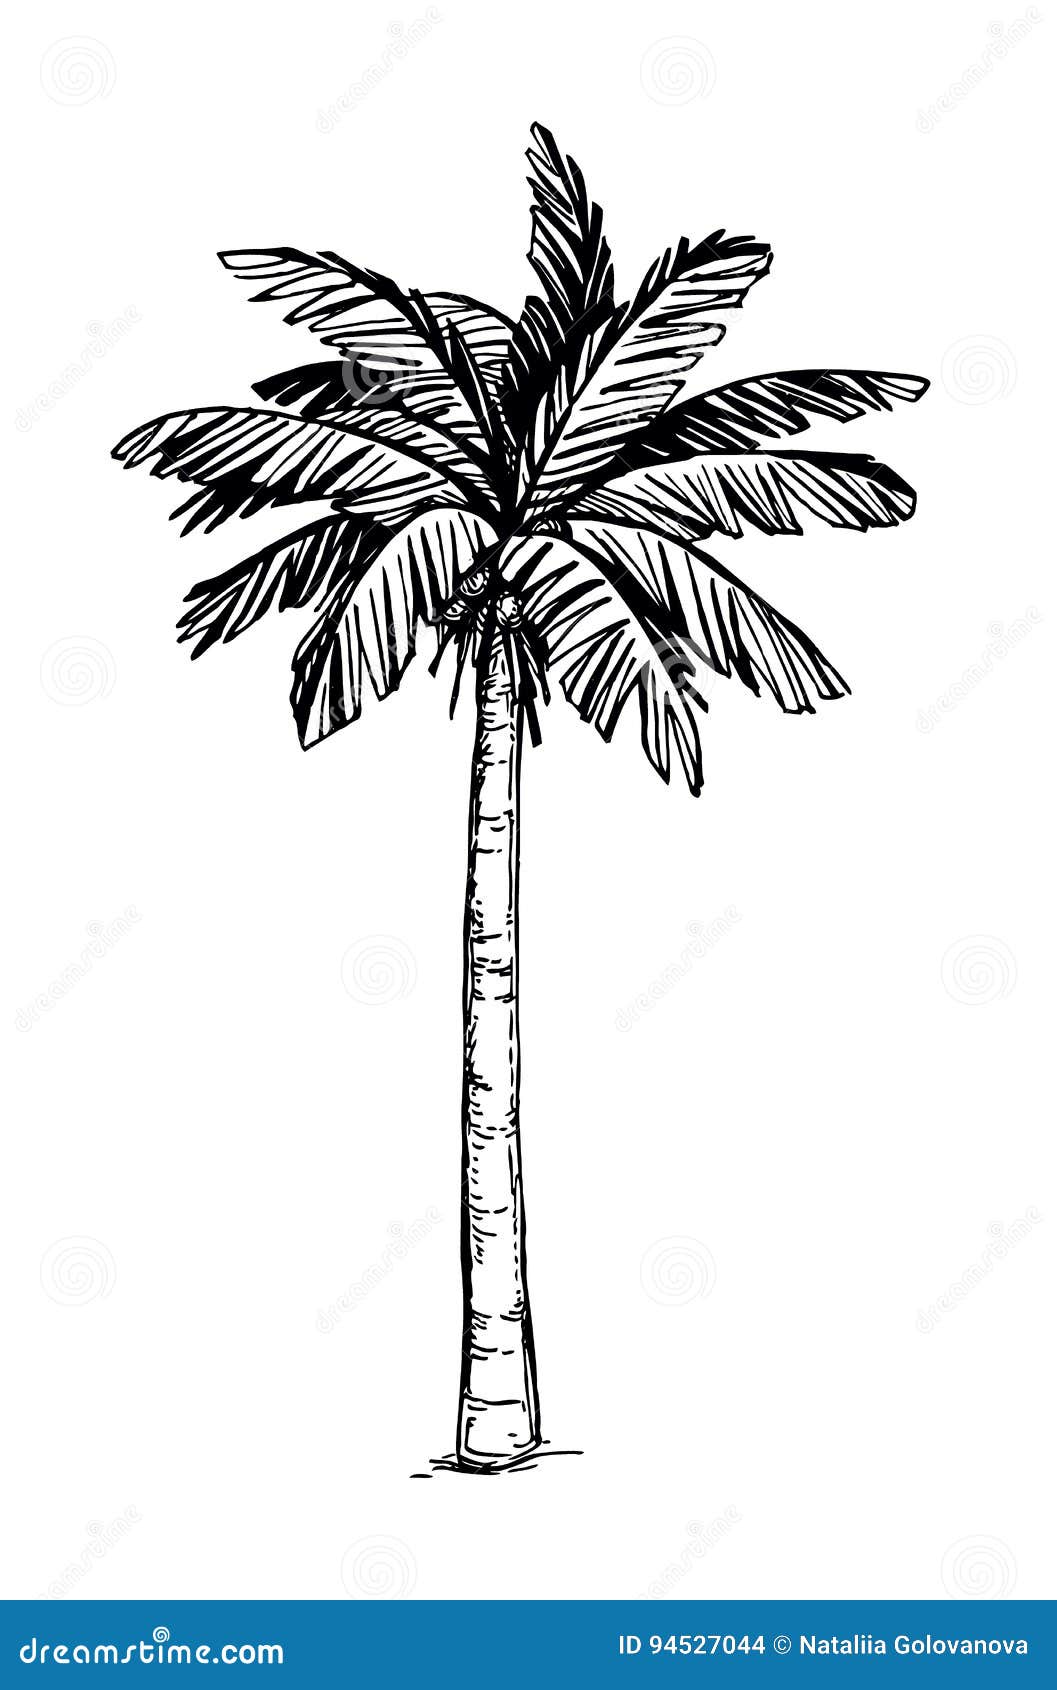 230550 Palm Tree Drawing Images Stock Photos  Vectors  Shutterstock